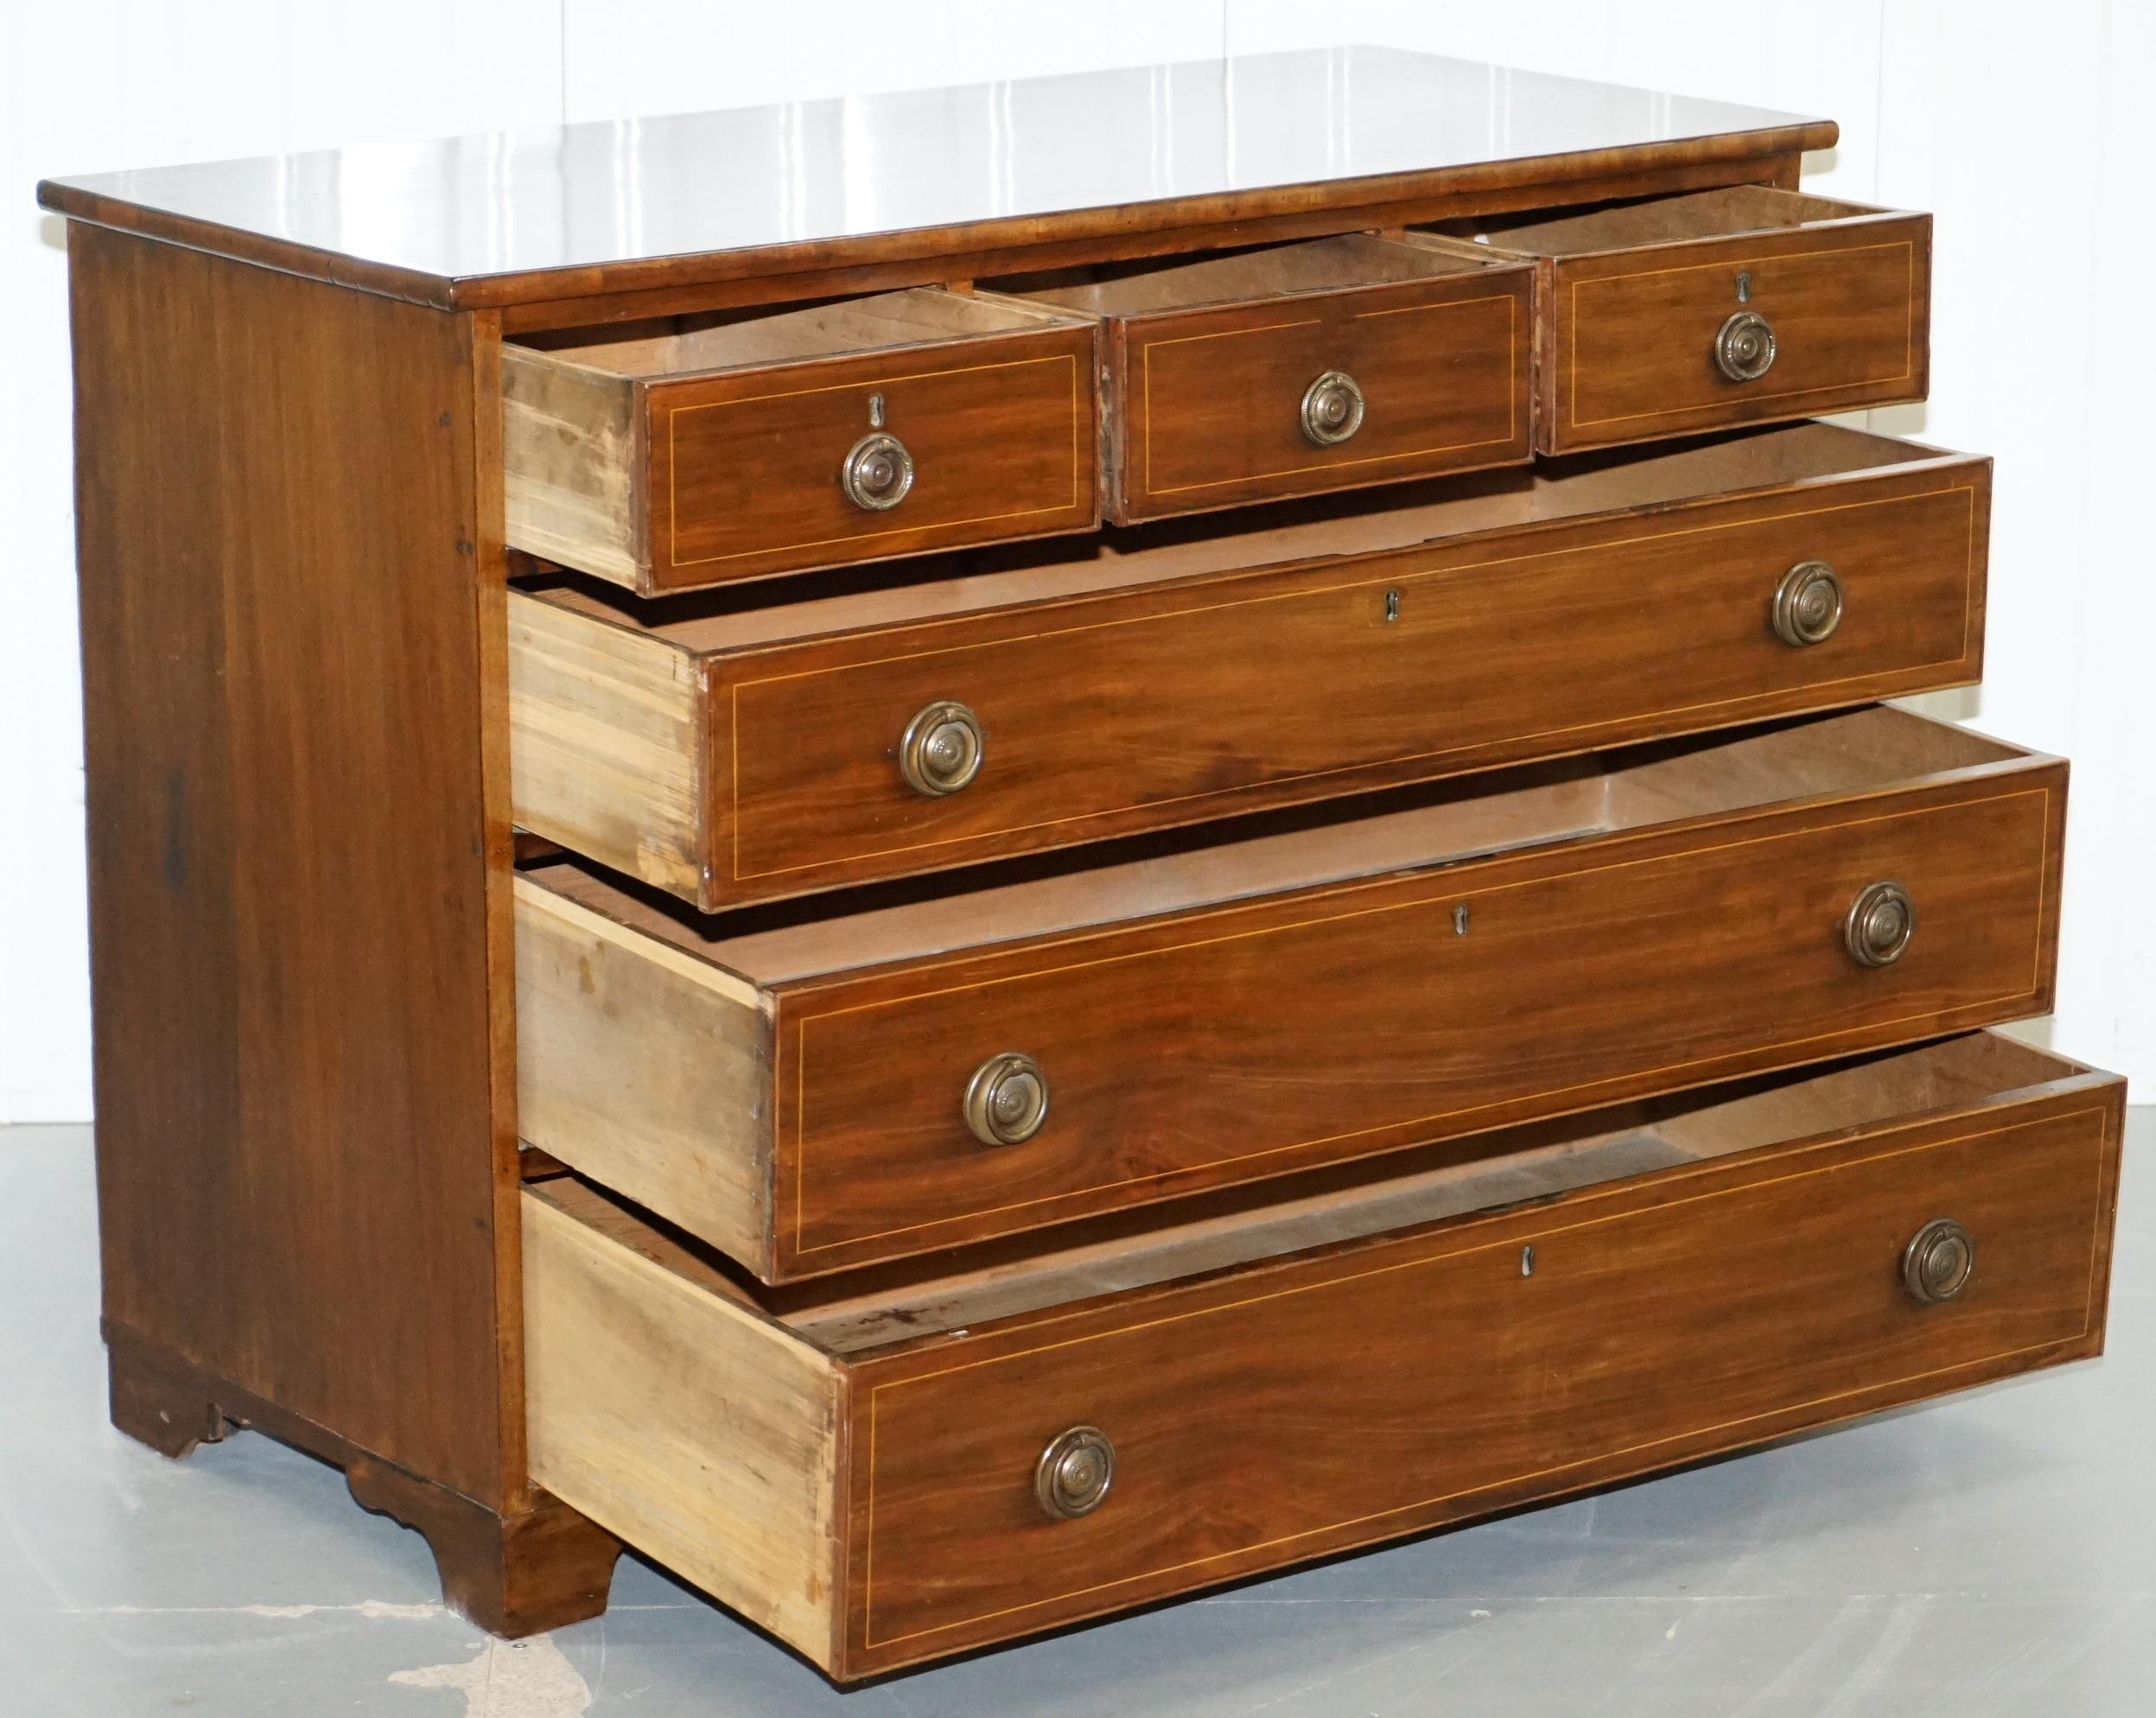 Lovely circa 1800 Georgian Hardwood Chest of Drawers Three over Three Formation 11